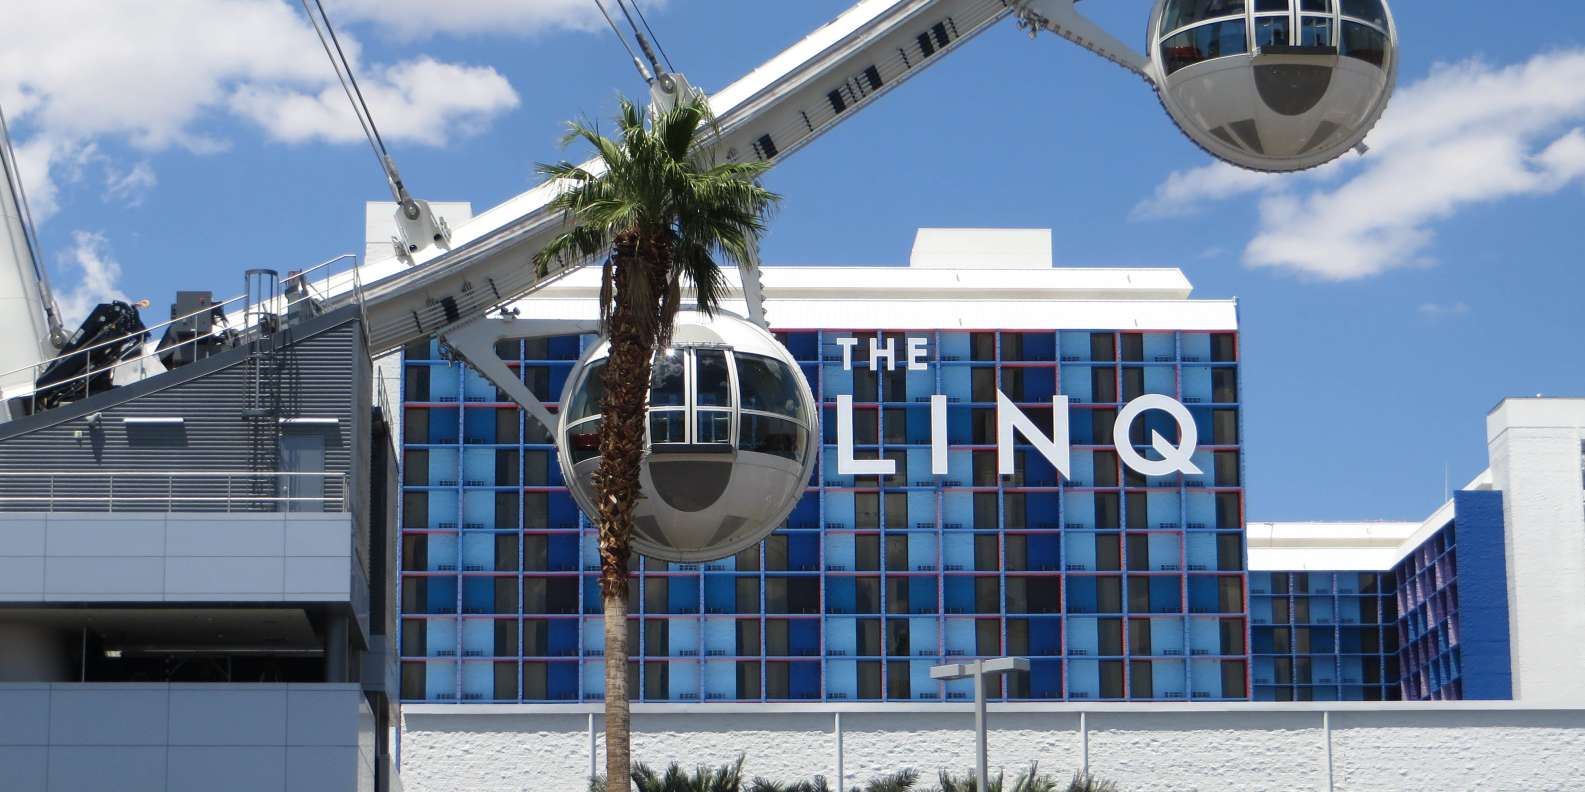 the-linq-promenade-las-vegas-book-tickets-tours-getyourguide